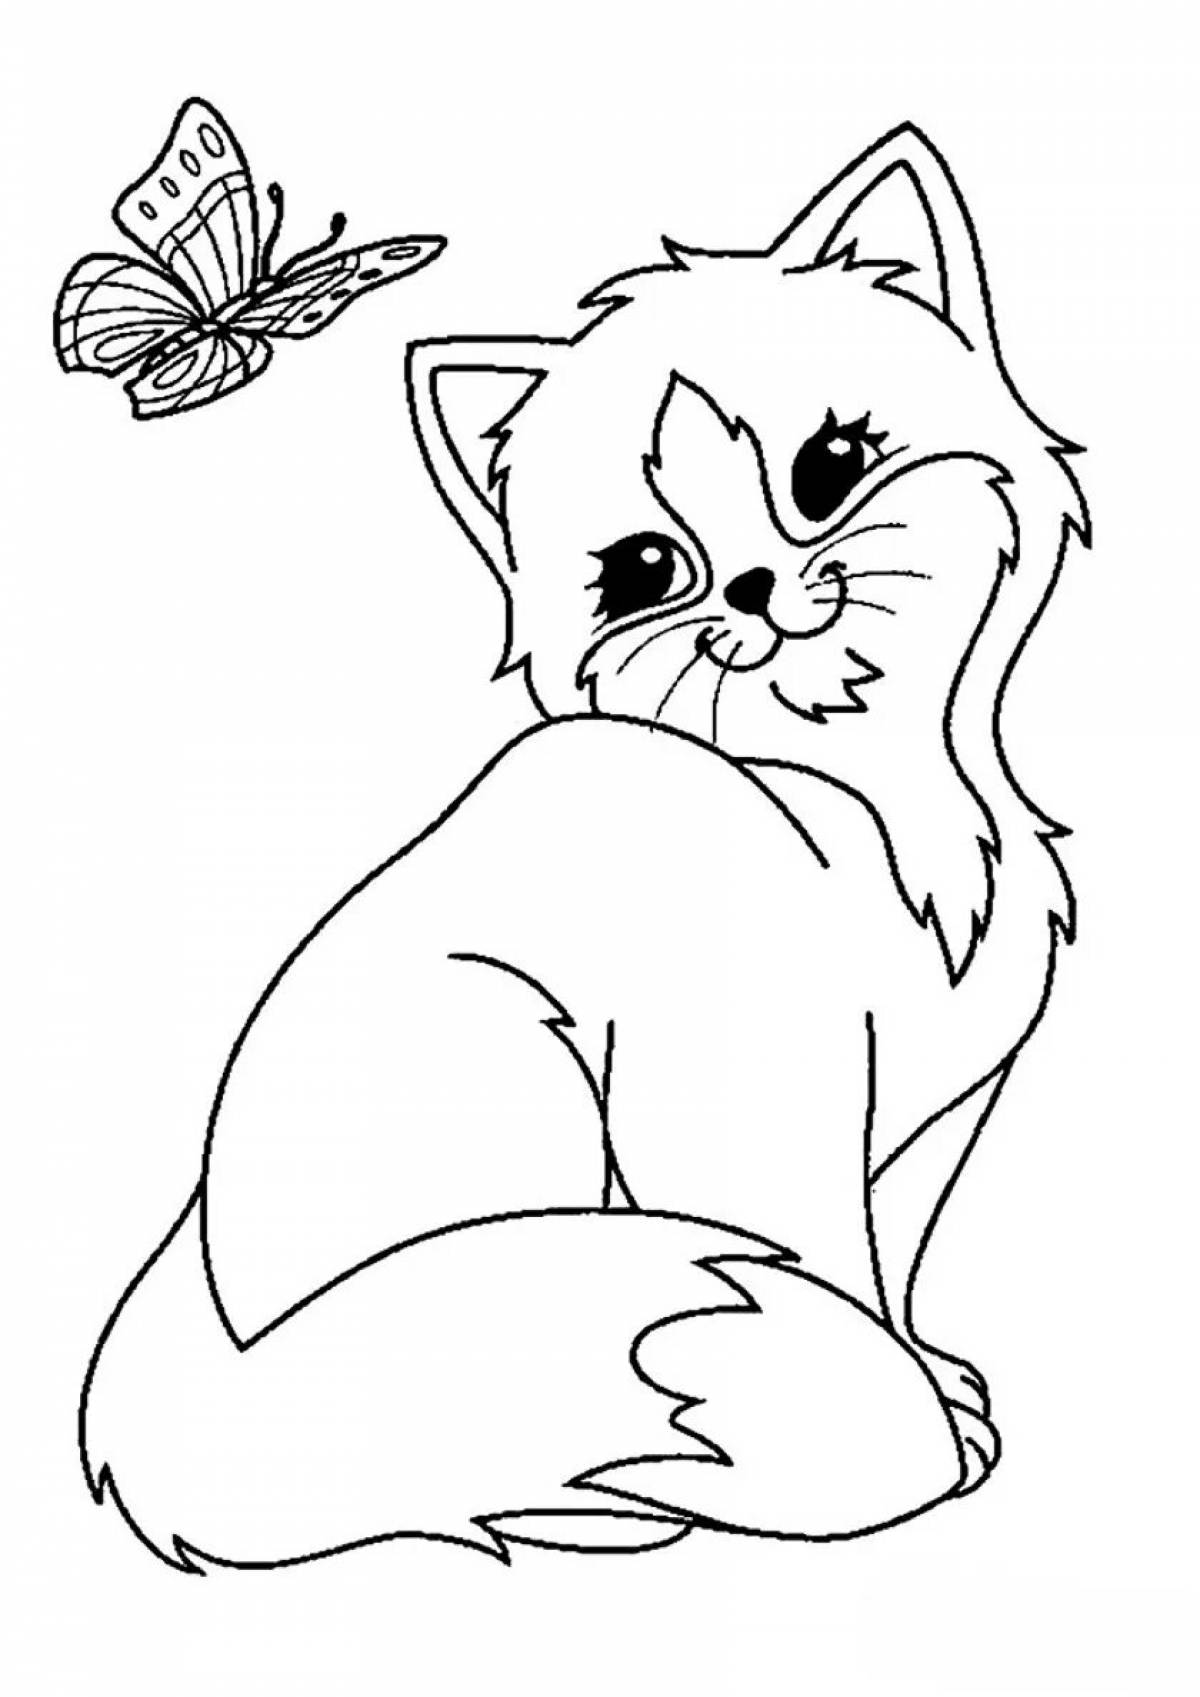 Hugging cat coloring page for children 5-6 years old